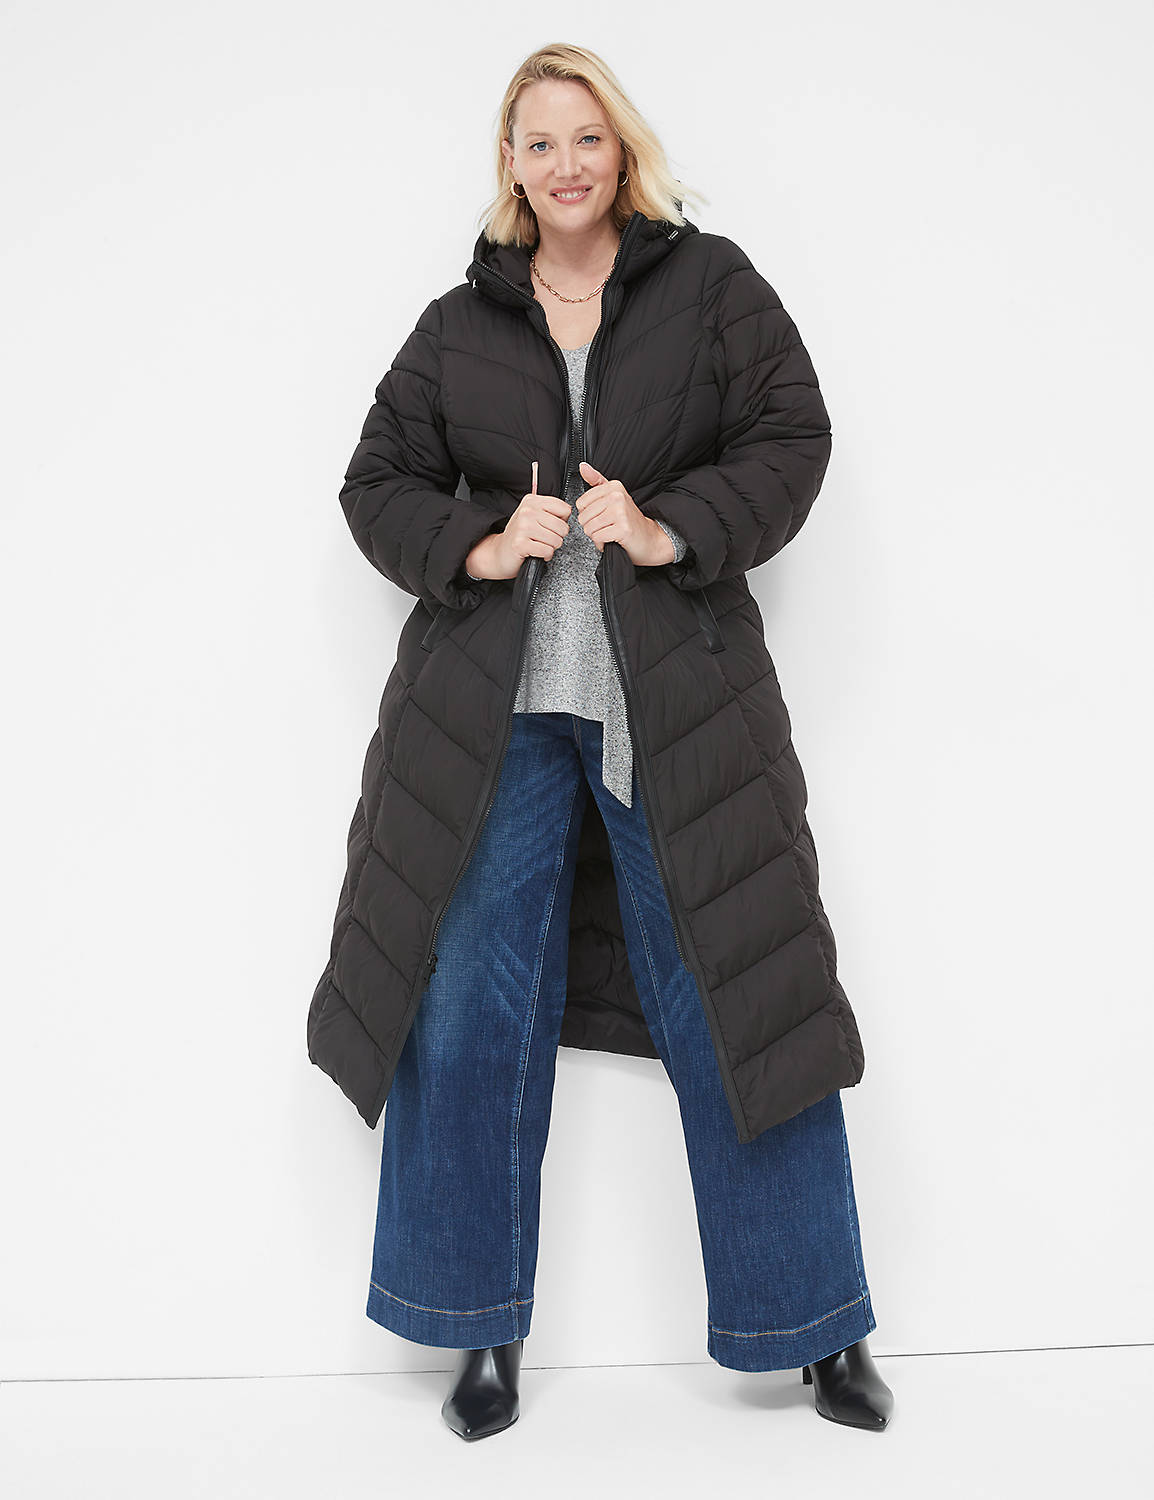 Front Zip Maxi Puffer 1136981 Product Image 1